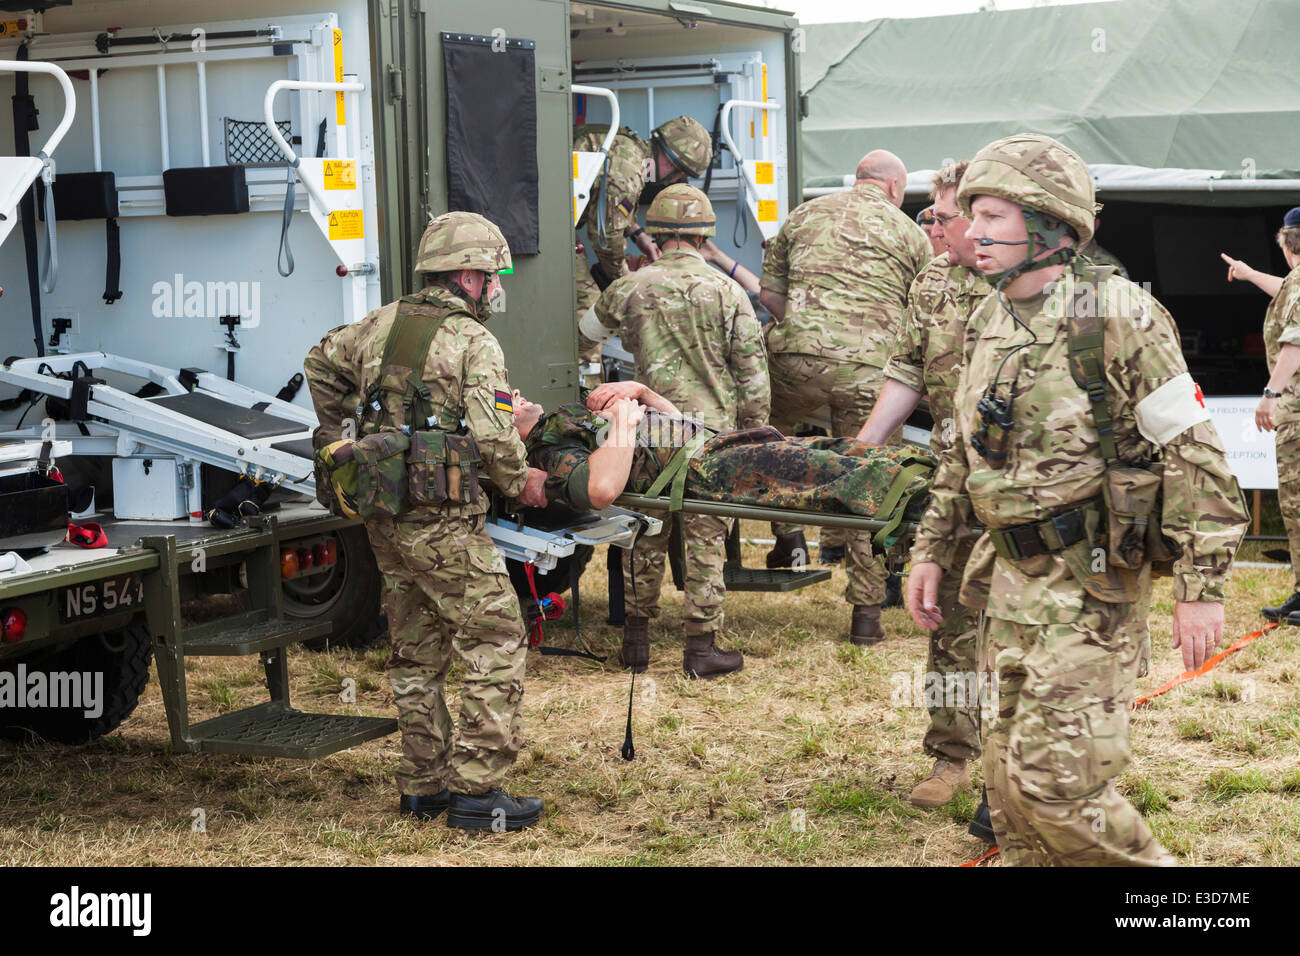 Wounded arriving at a field hospital during military exercise on Armed Forces Day, Newtownards, Co. Down Stock Photo